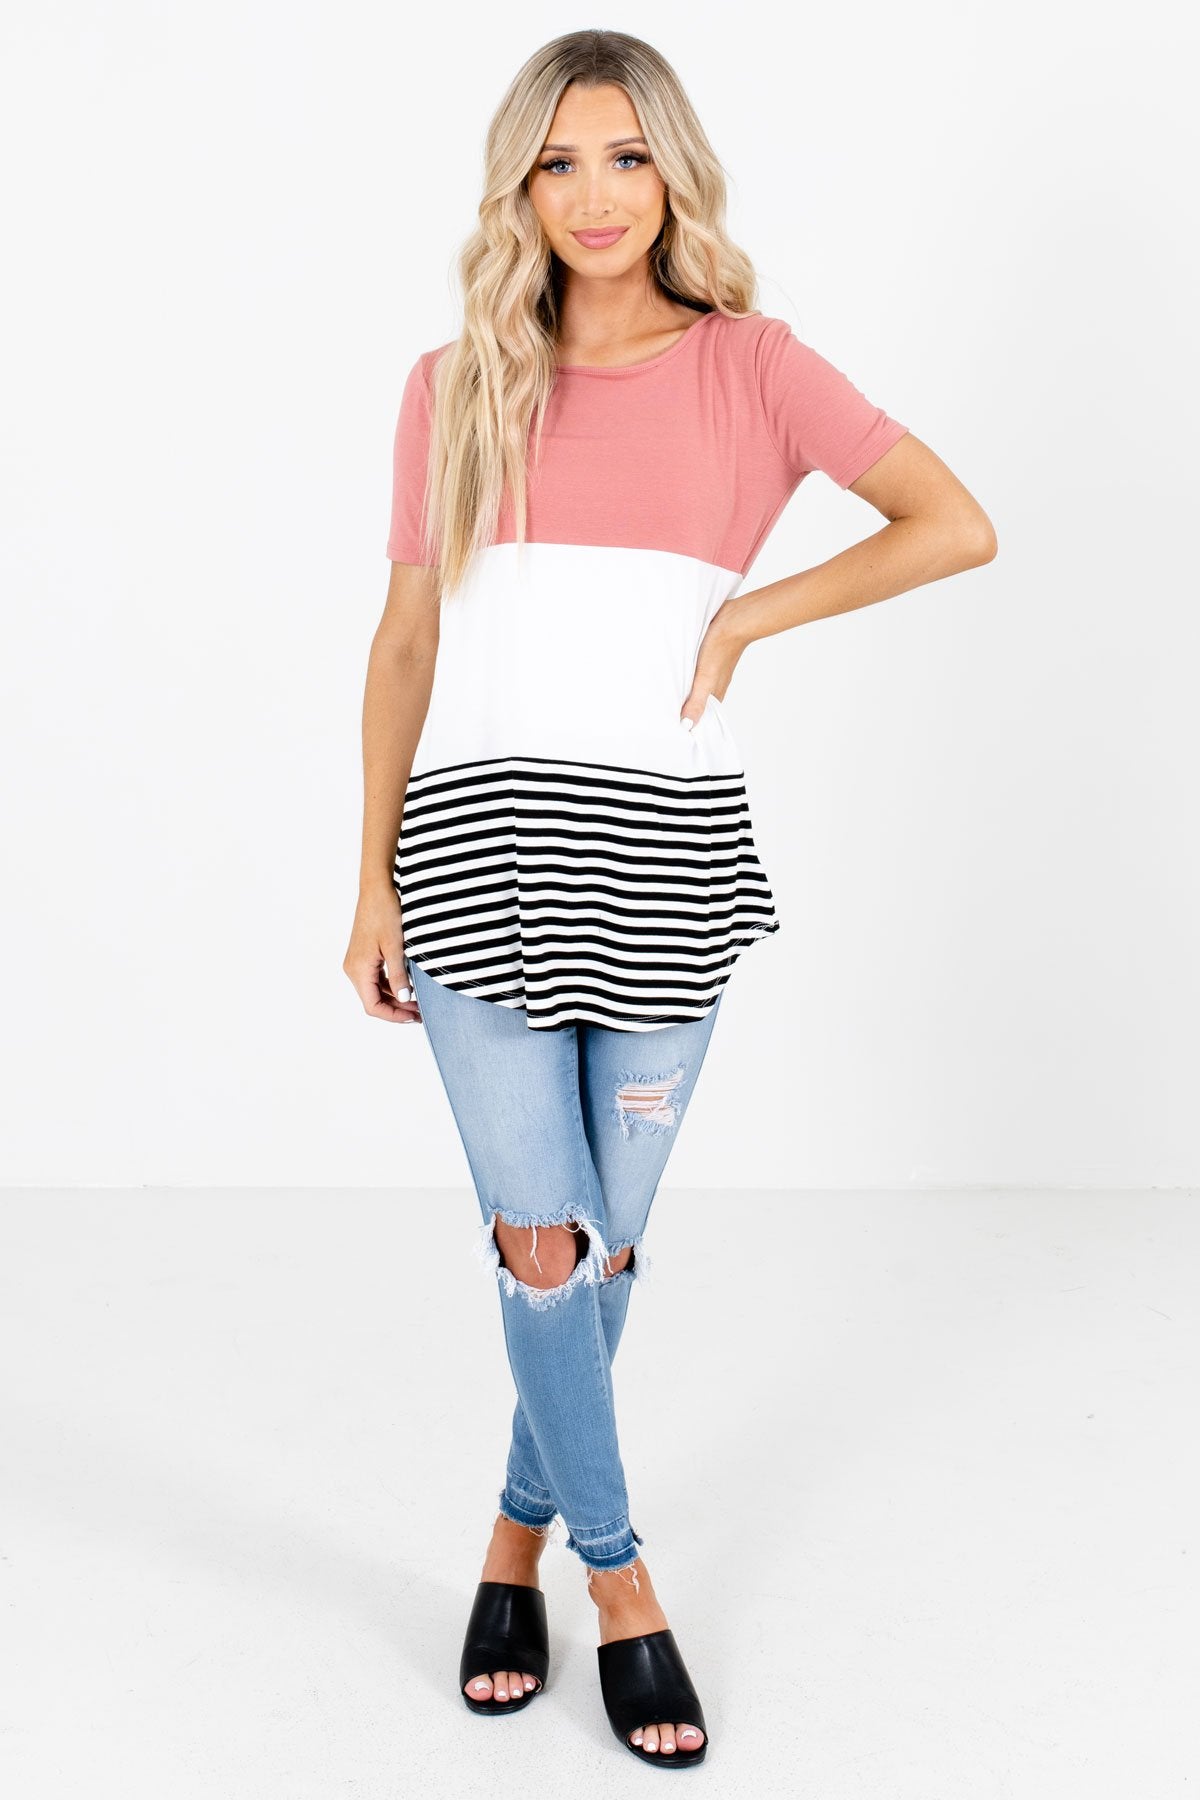 Pink Cute and Comfortable Boutique Tops for Women